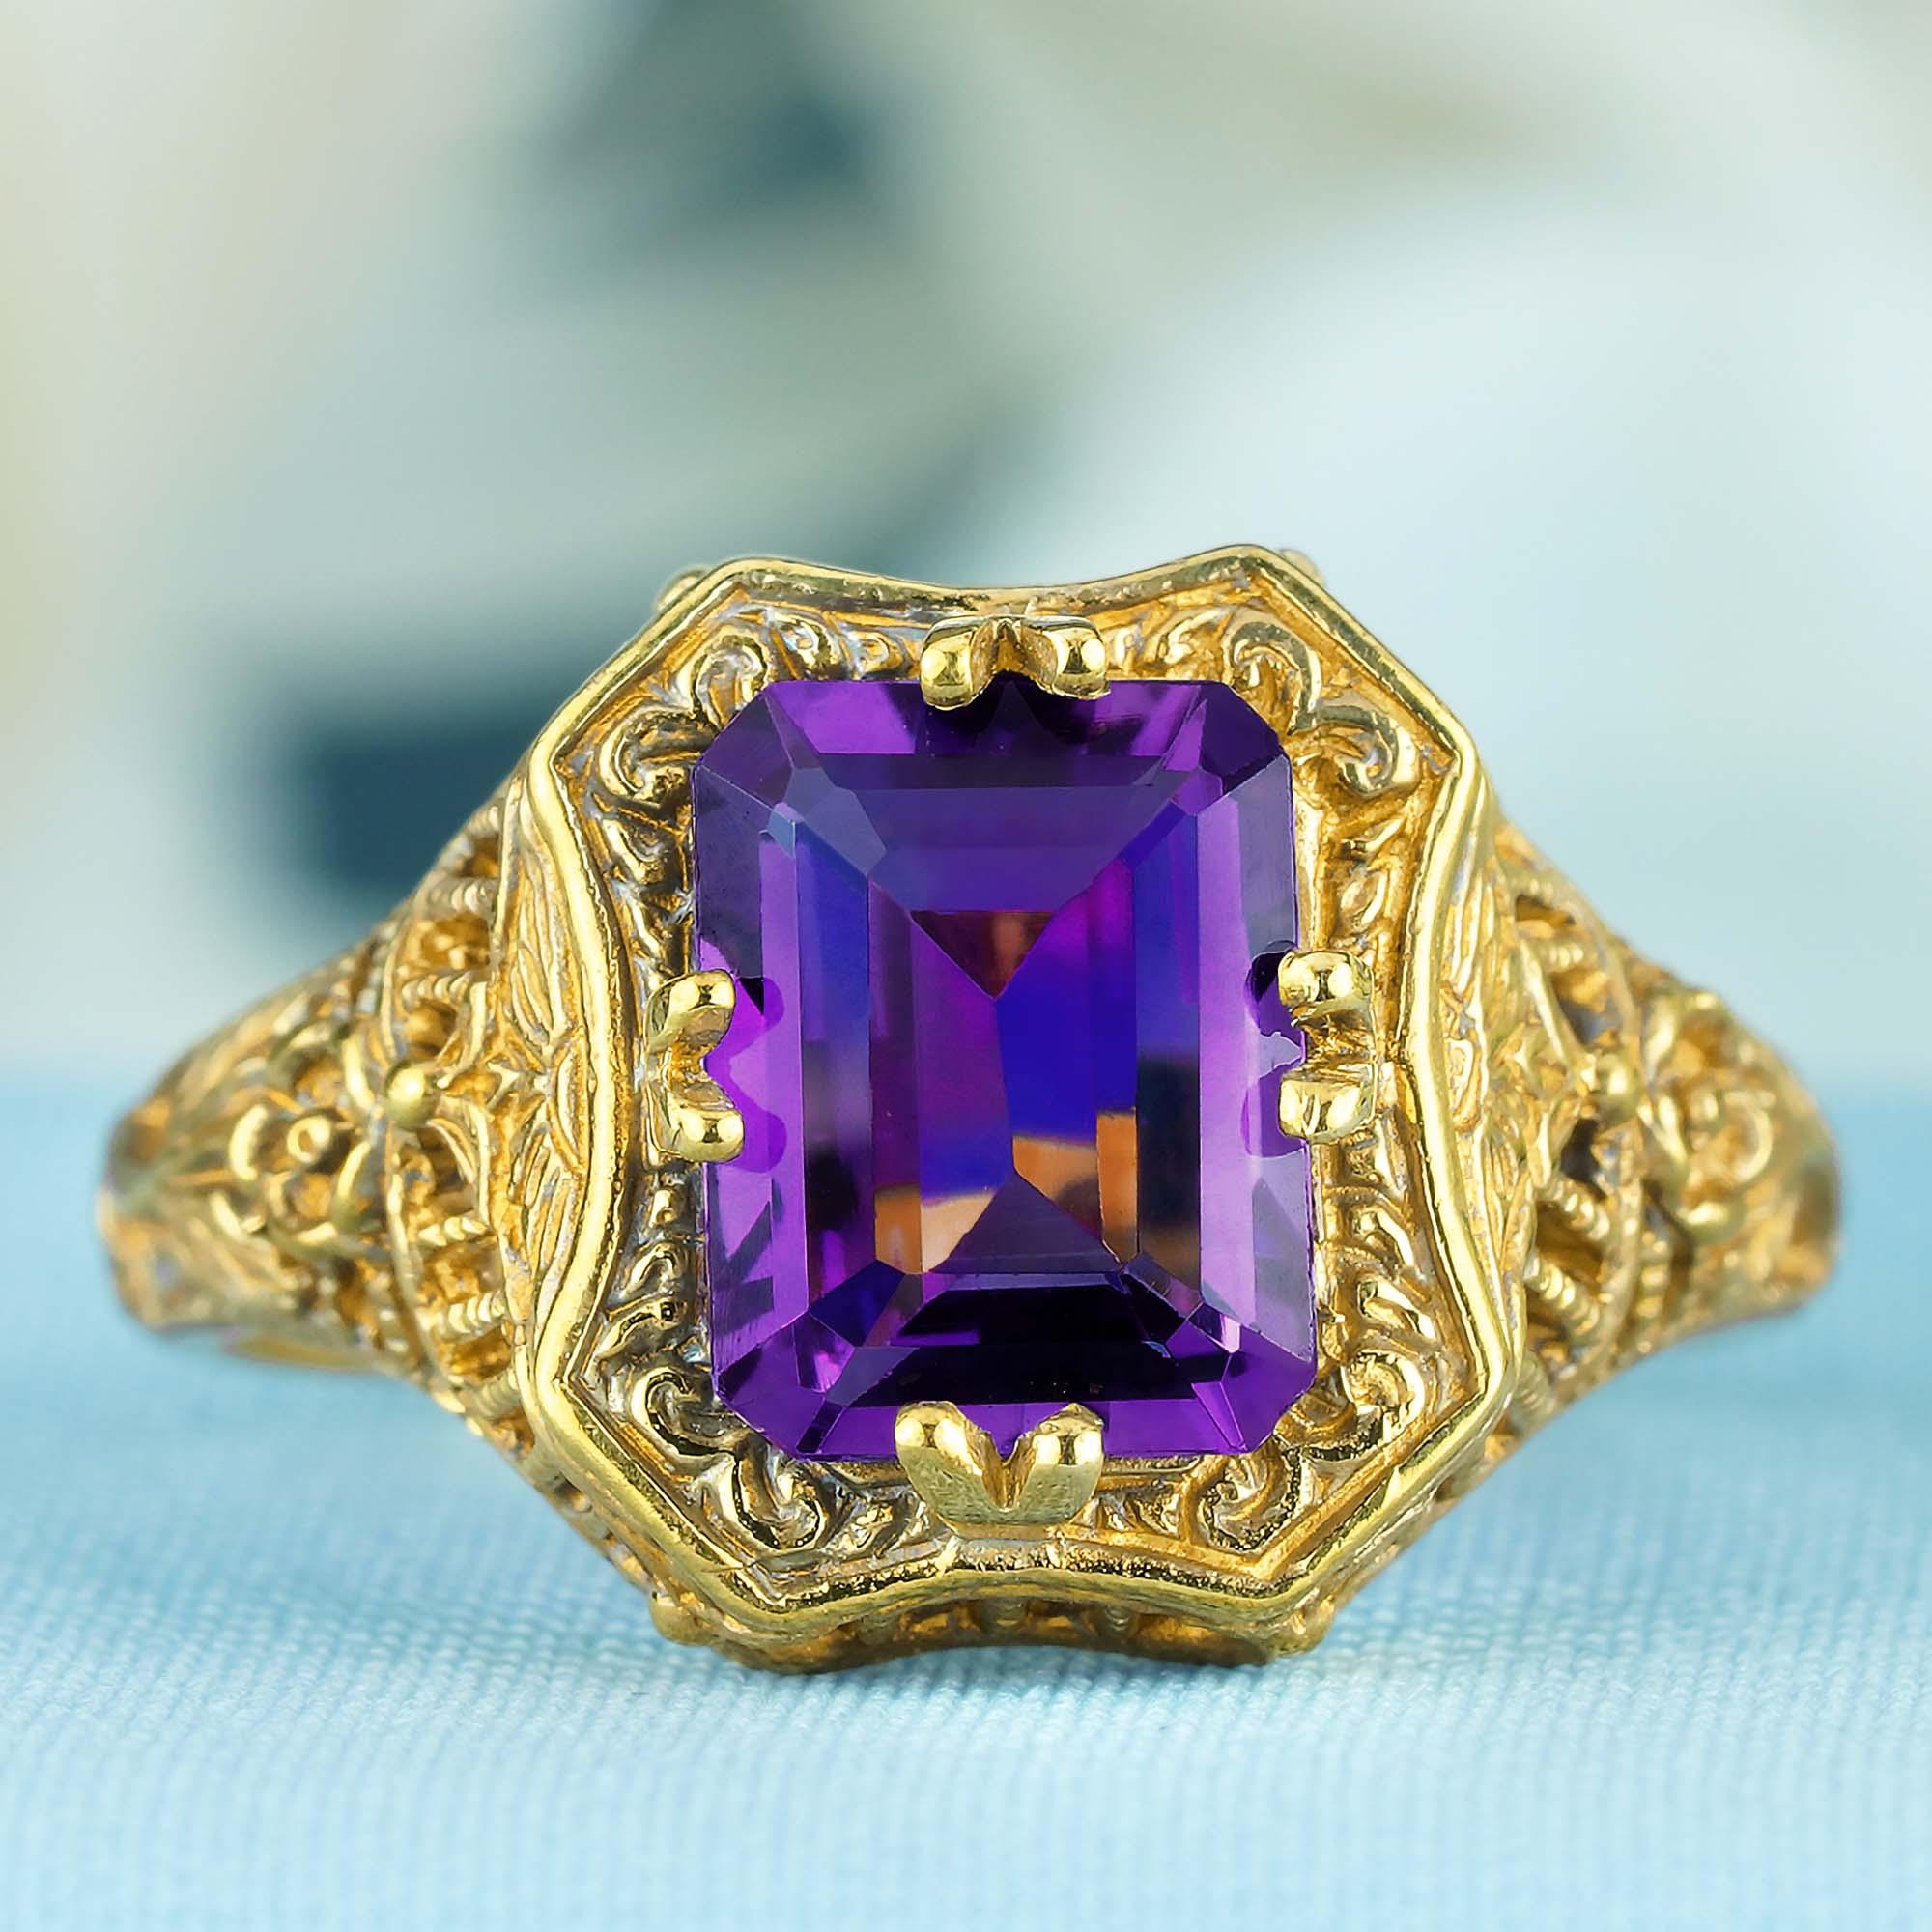 For Sale:  Natural Emerald Cut Amethyst Vintage Style Filigree Ring in Solid 9K Yellow Gold 3